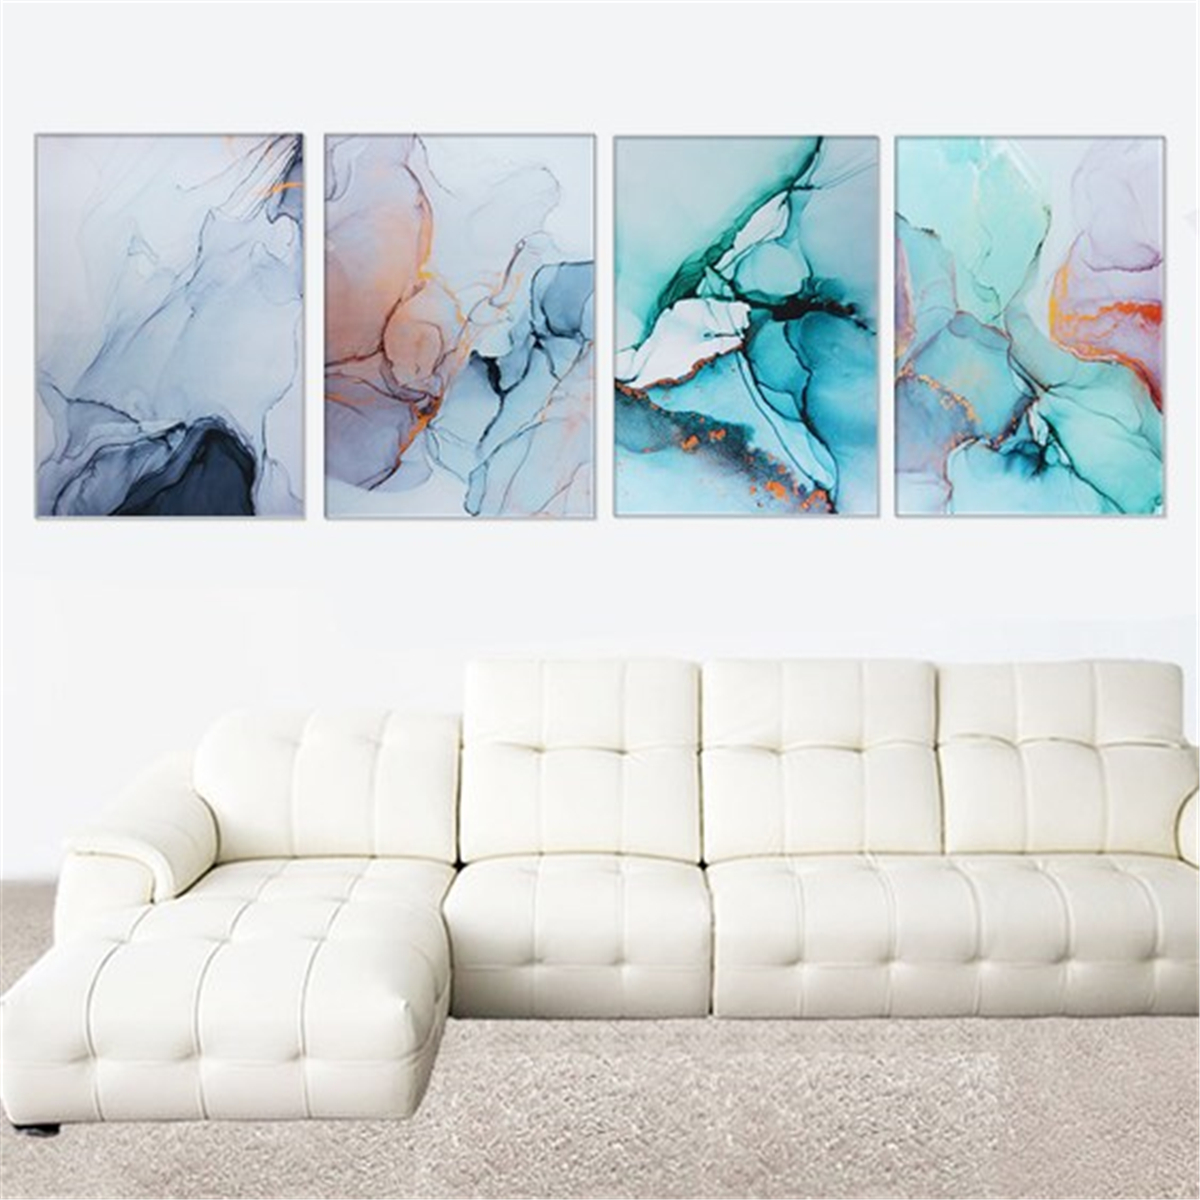 Marble-Canvas-Painting-Wall-Decorative-Print-Art-Picture-Unframed-Wall-Hanging-Home-Office-Decoratio-1800877-6